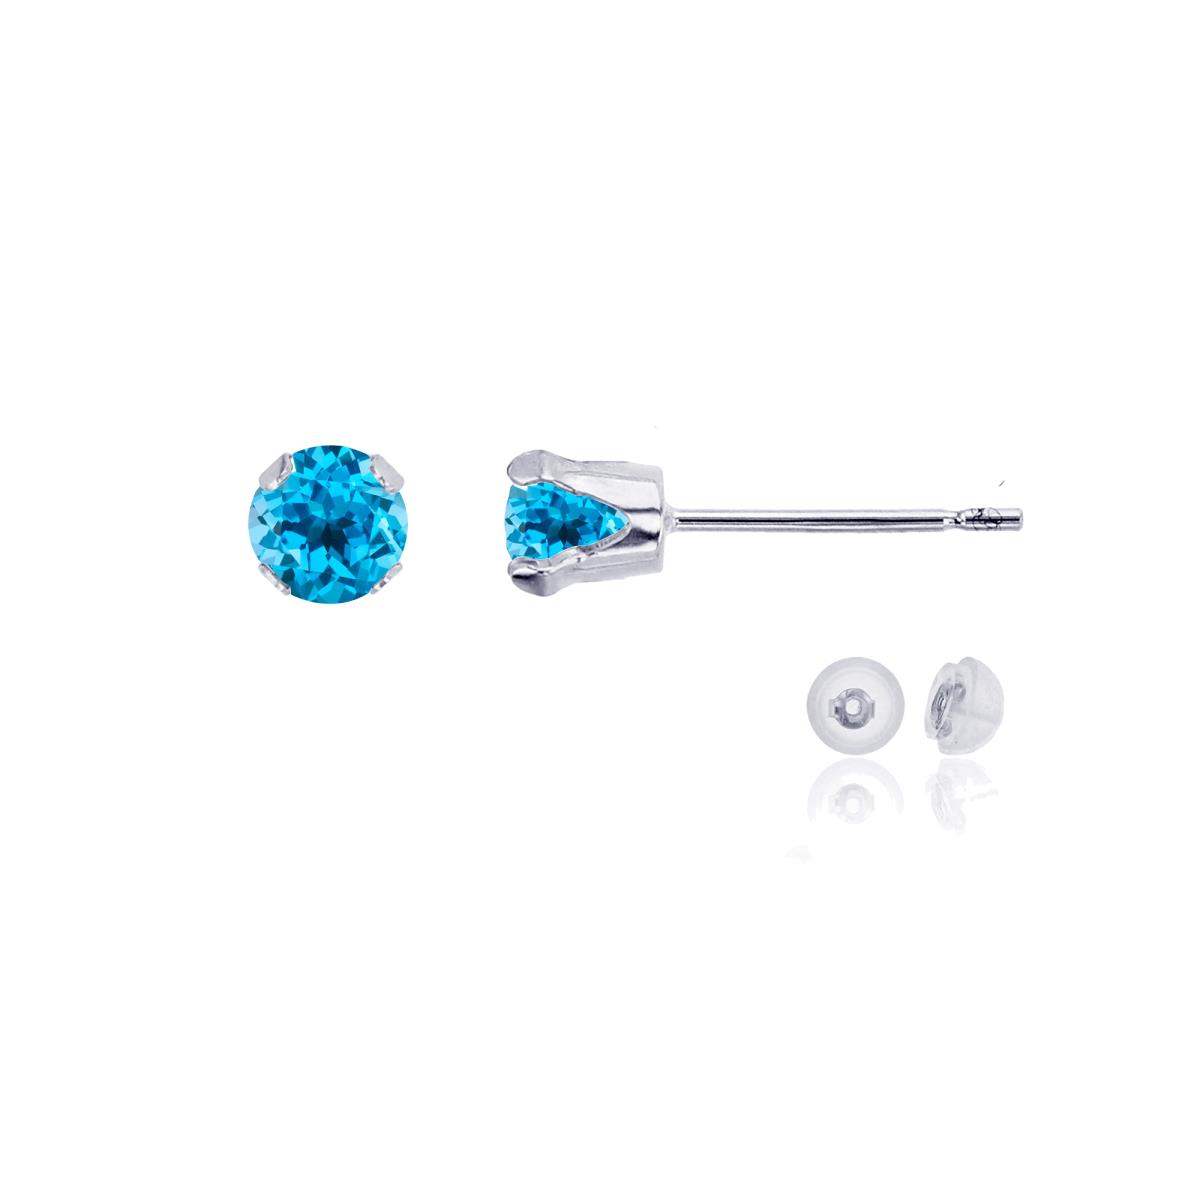 10K White Gold 4mm Round Swiss Blue Topaz Stud Earring with Silicone Back